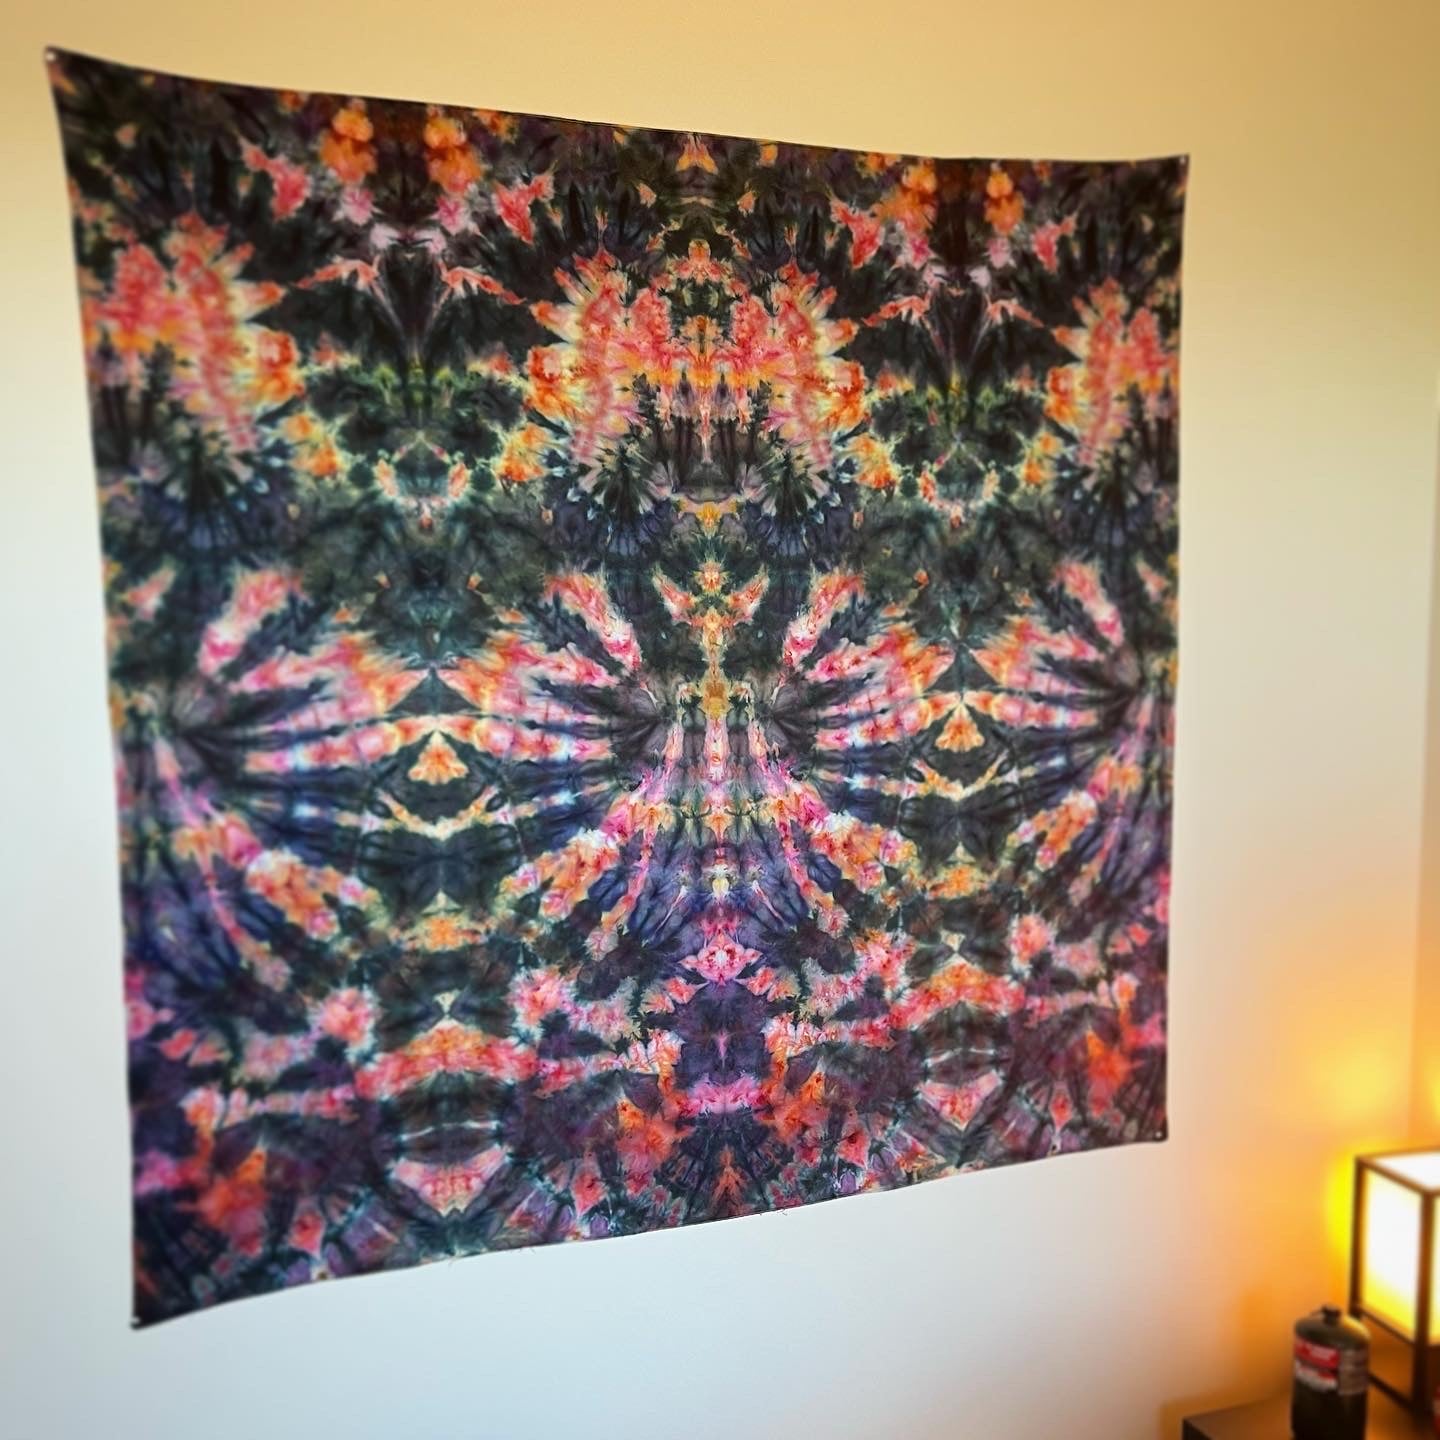 59” x 59” Astral Gate Tapestry